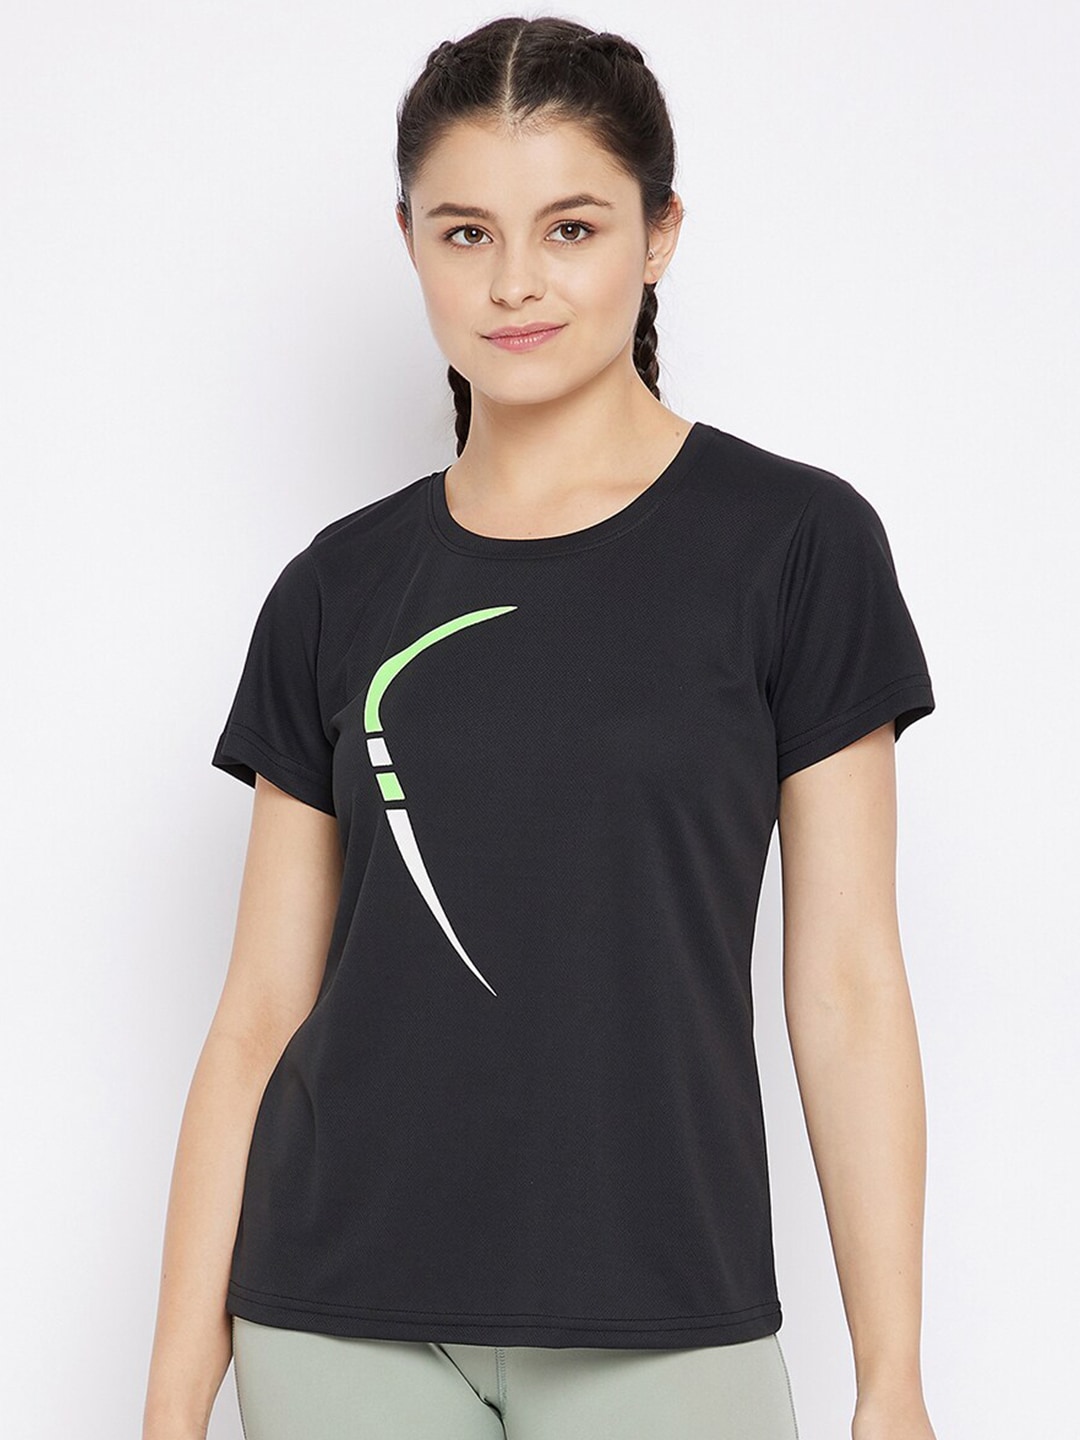 Clovia Women Black Solid Training or Gym T-shirt Price in India